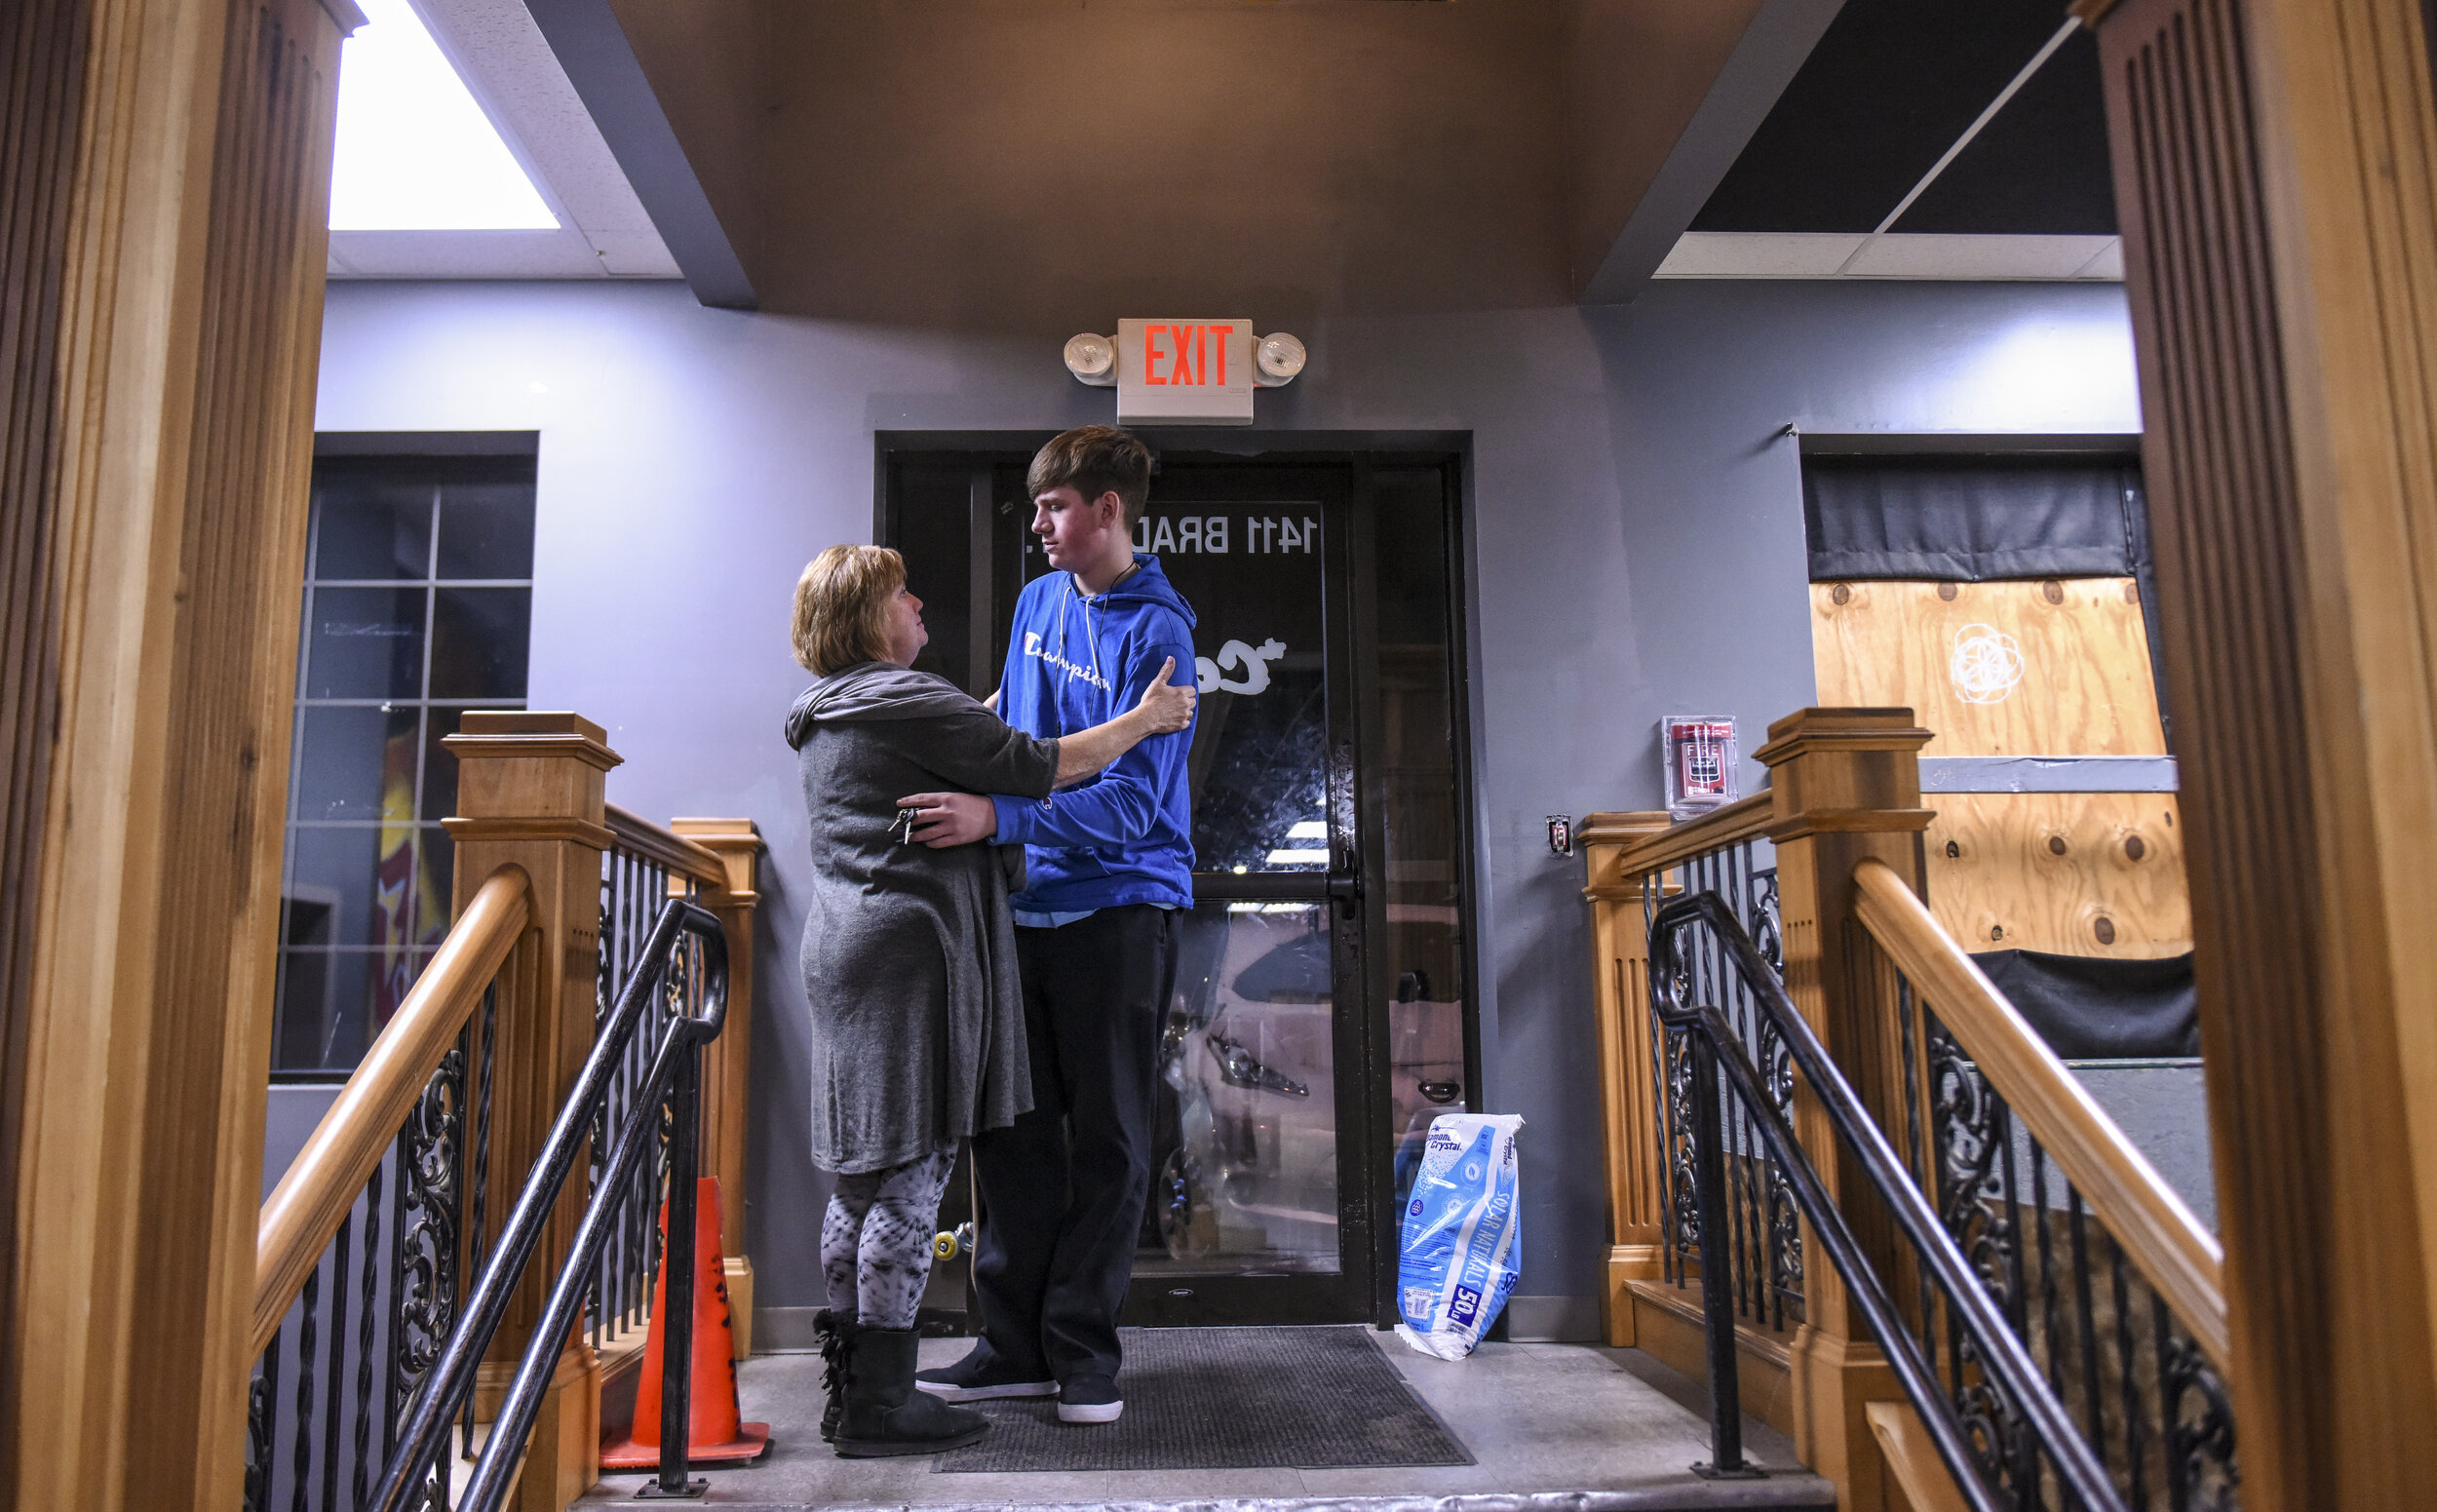  Pennie Kellenberger, director of The Center, and Dylan Nelson embrace Dec. 18 in Davenport after attendees were informed Skate Church would close Jan. 1. Skate Church's future is precarious while its leaders try to sort out insurance issues.  